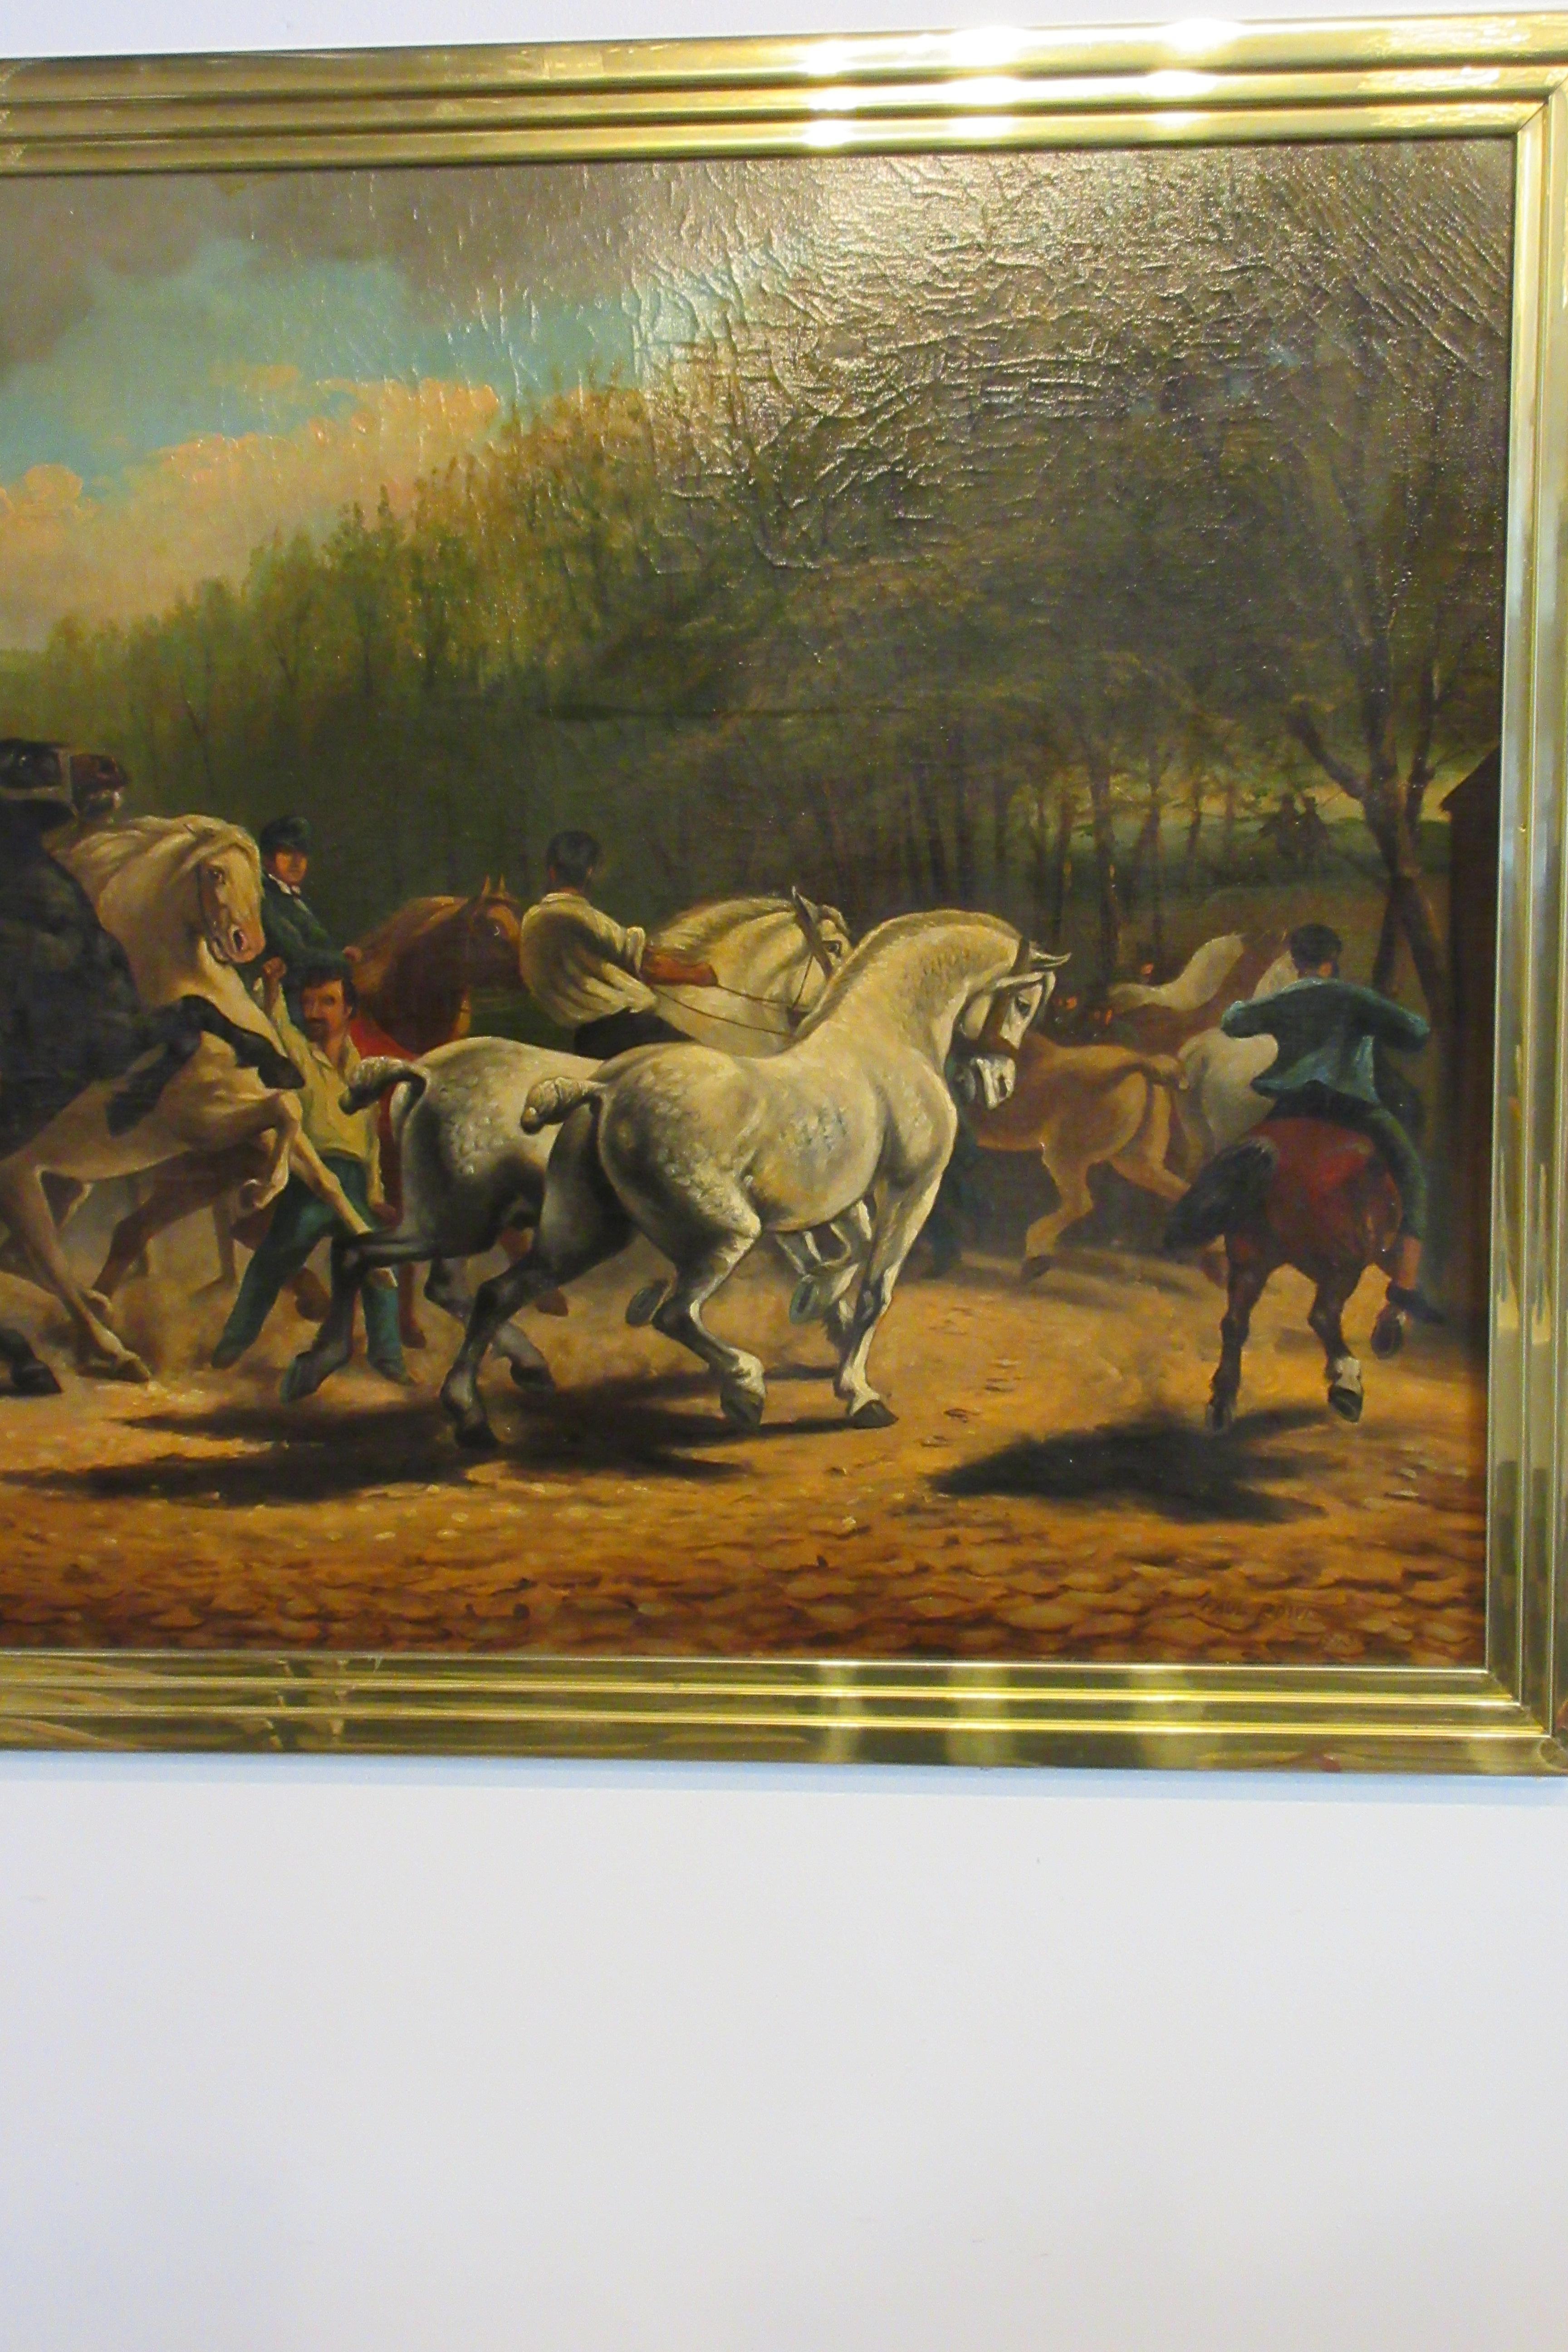 19th century oil painting of men on horses by Paul 
owis dated 1893. From a NYC penthouse apartment.